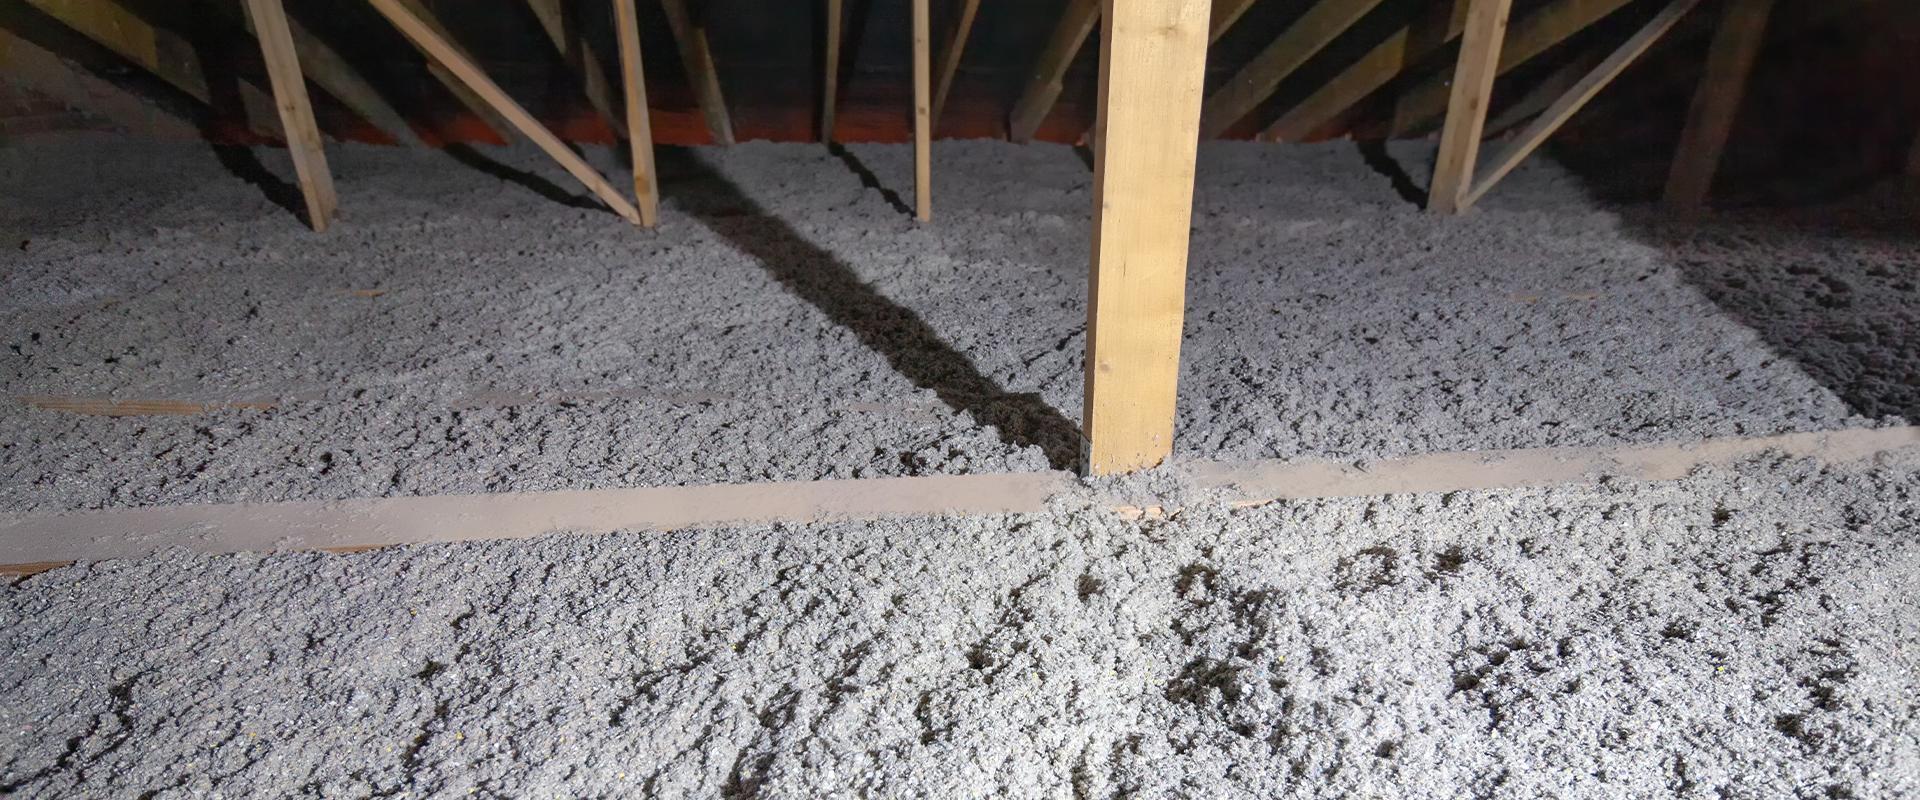 tap insulation in an attic